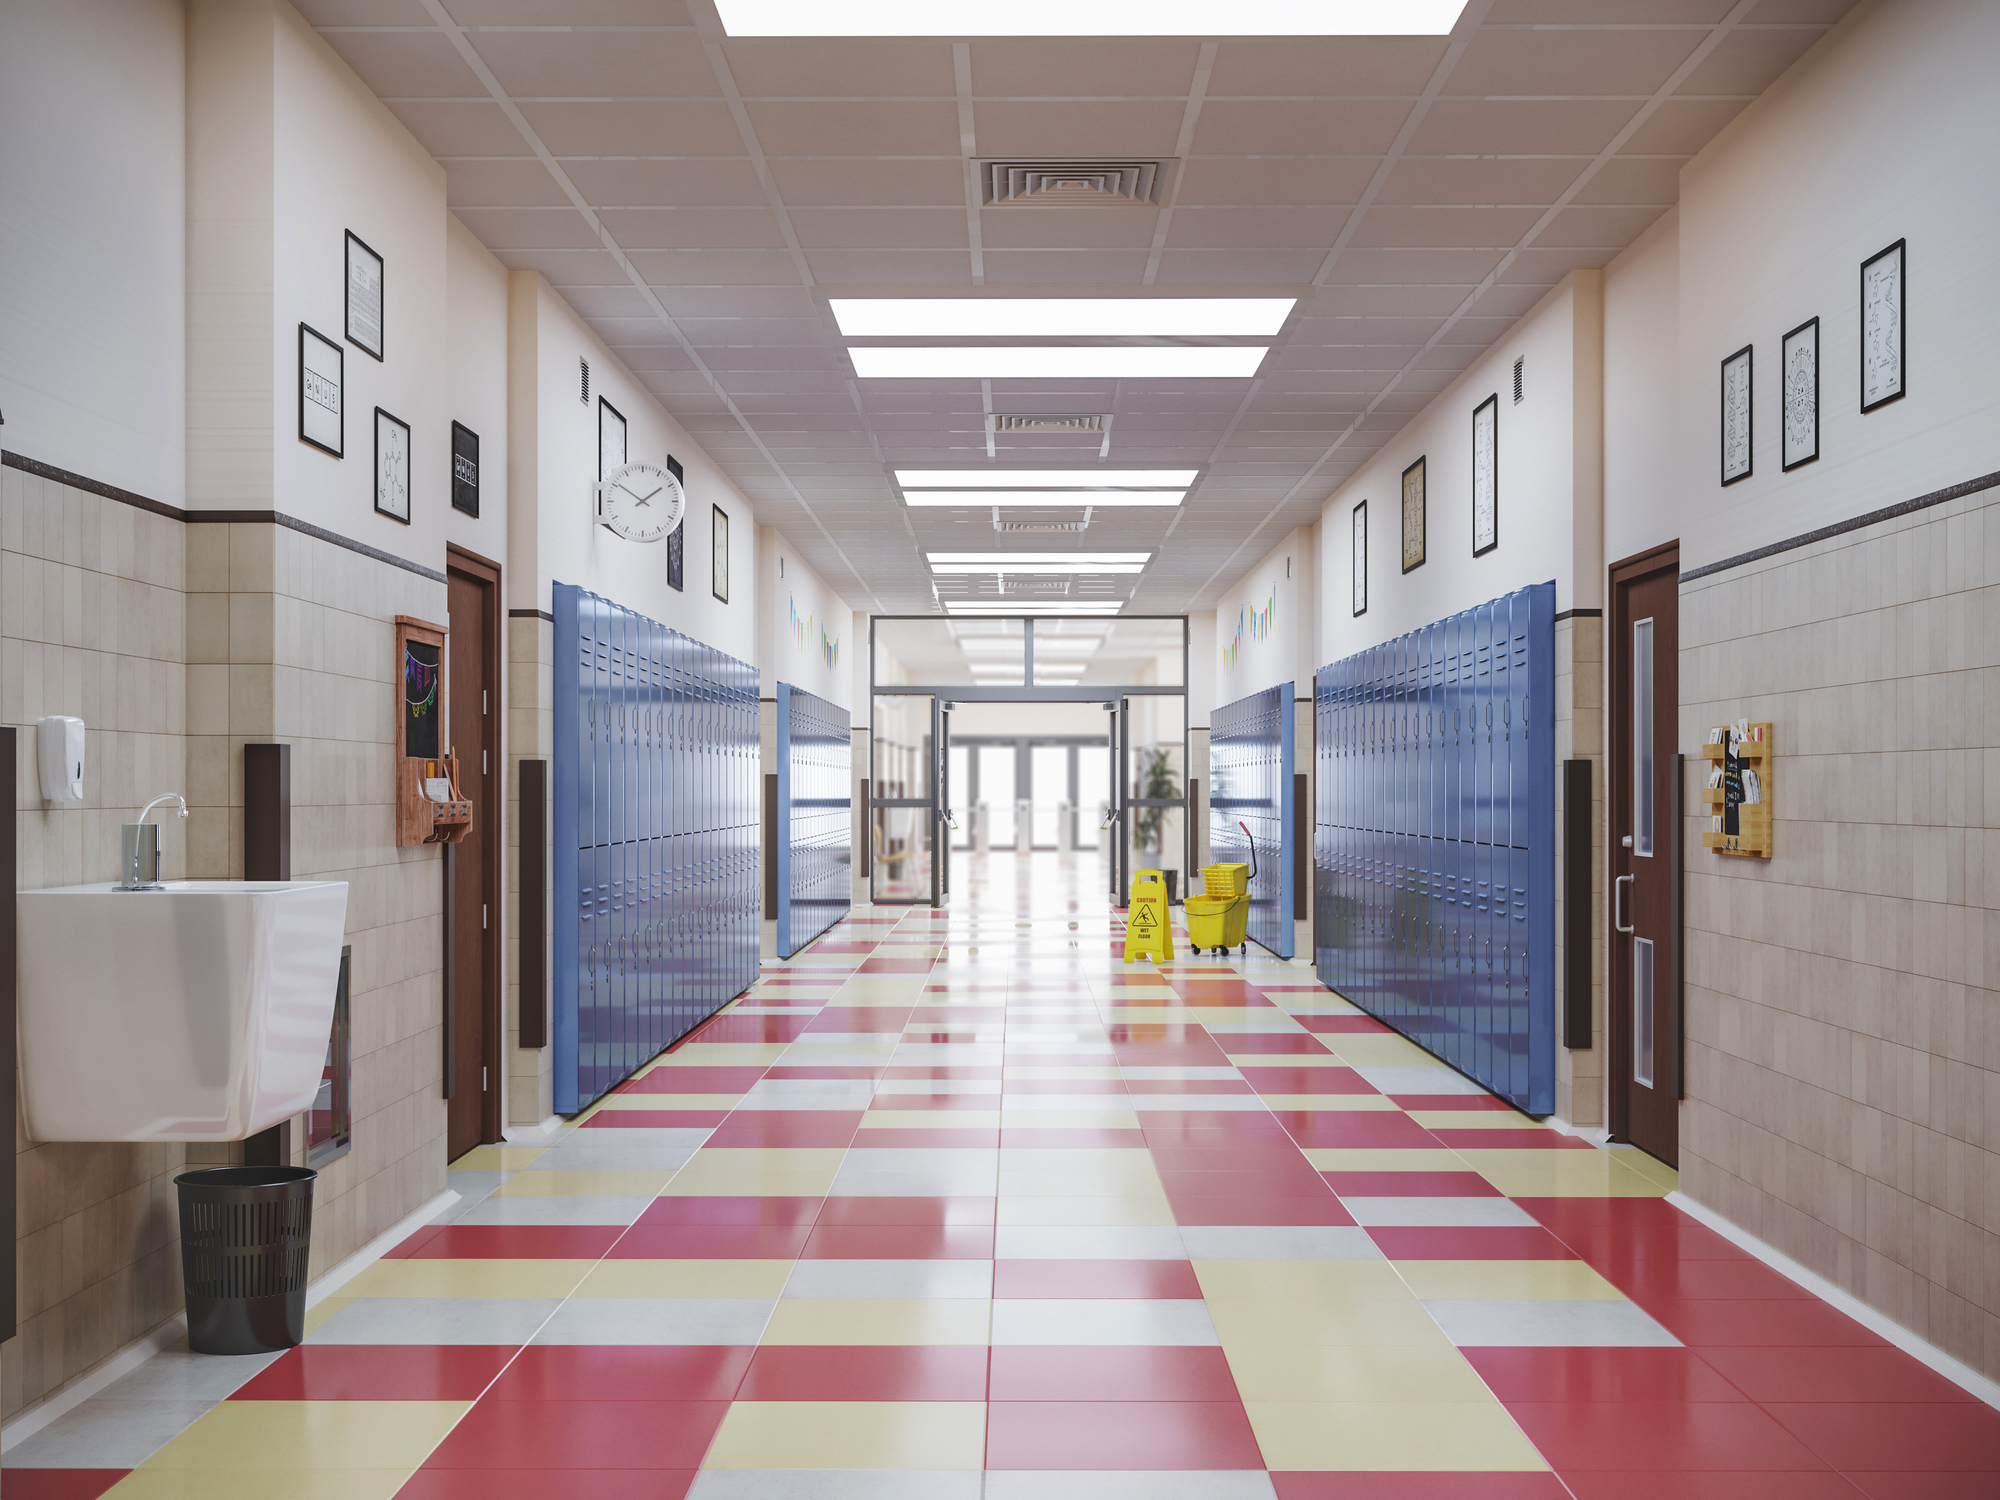 An Expert’s Take on Securing Your School